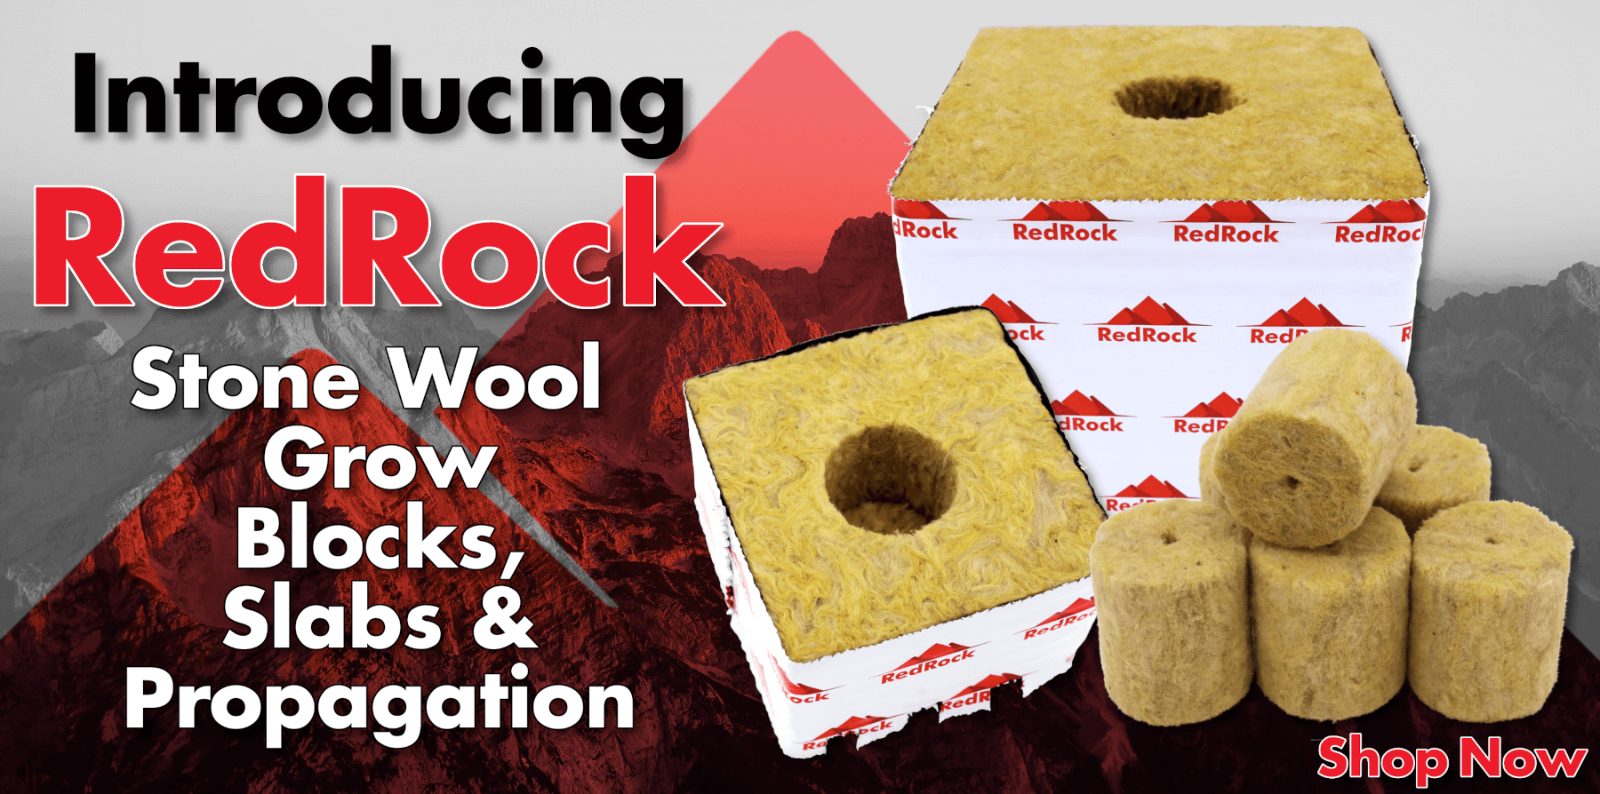 Introducing RedRock Stone Wool Grow Blocks, Slabs and Propagation Shop Now